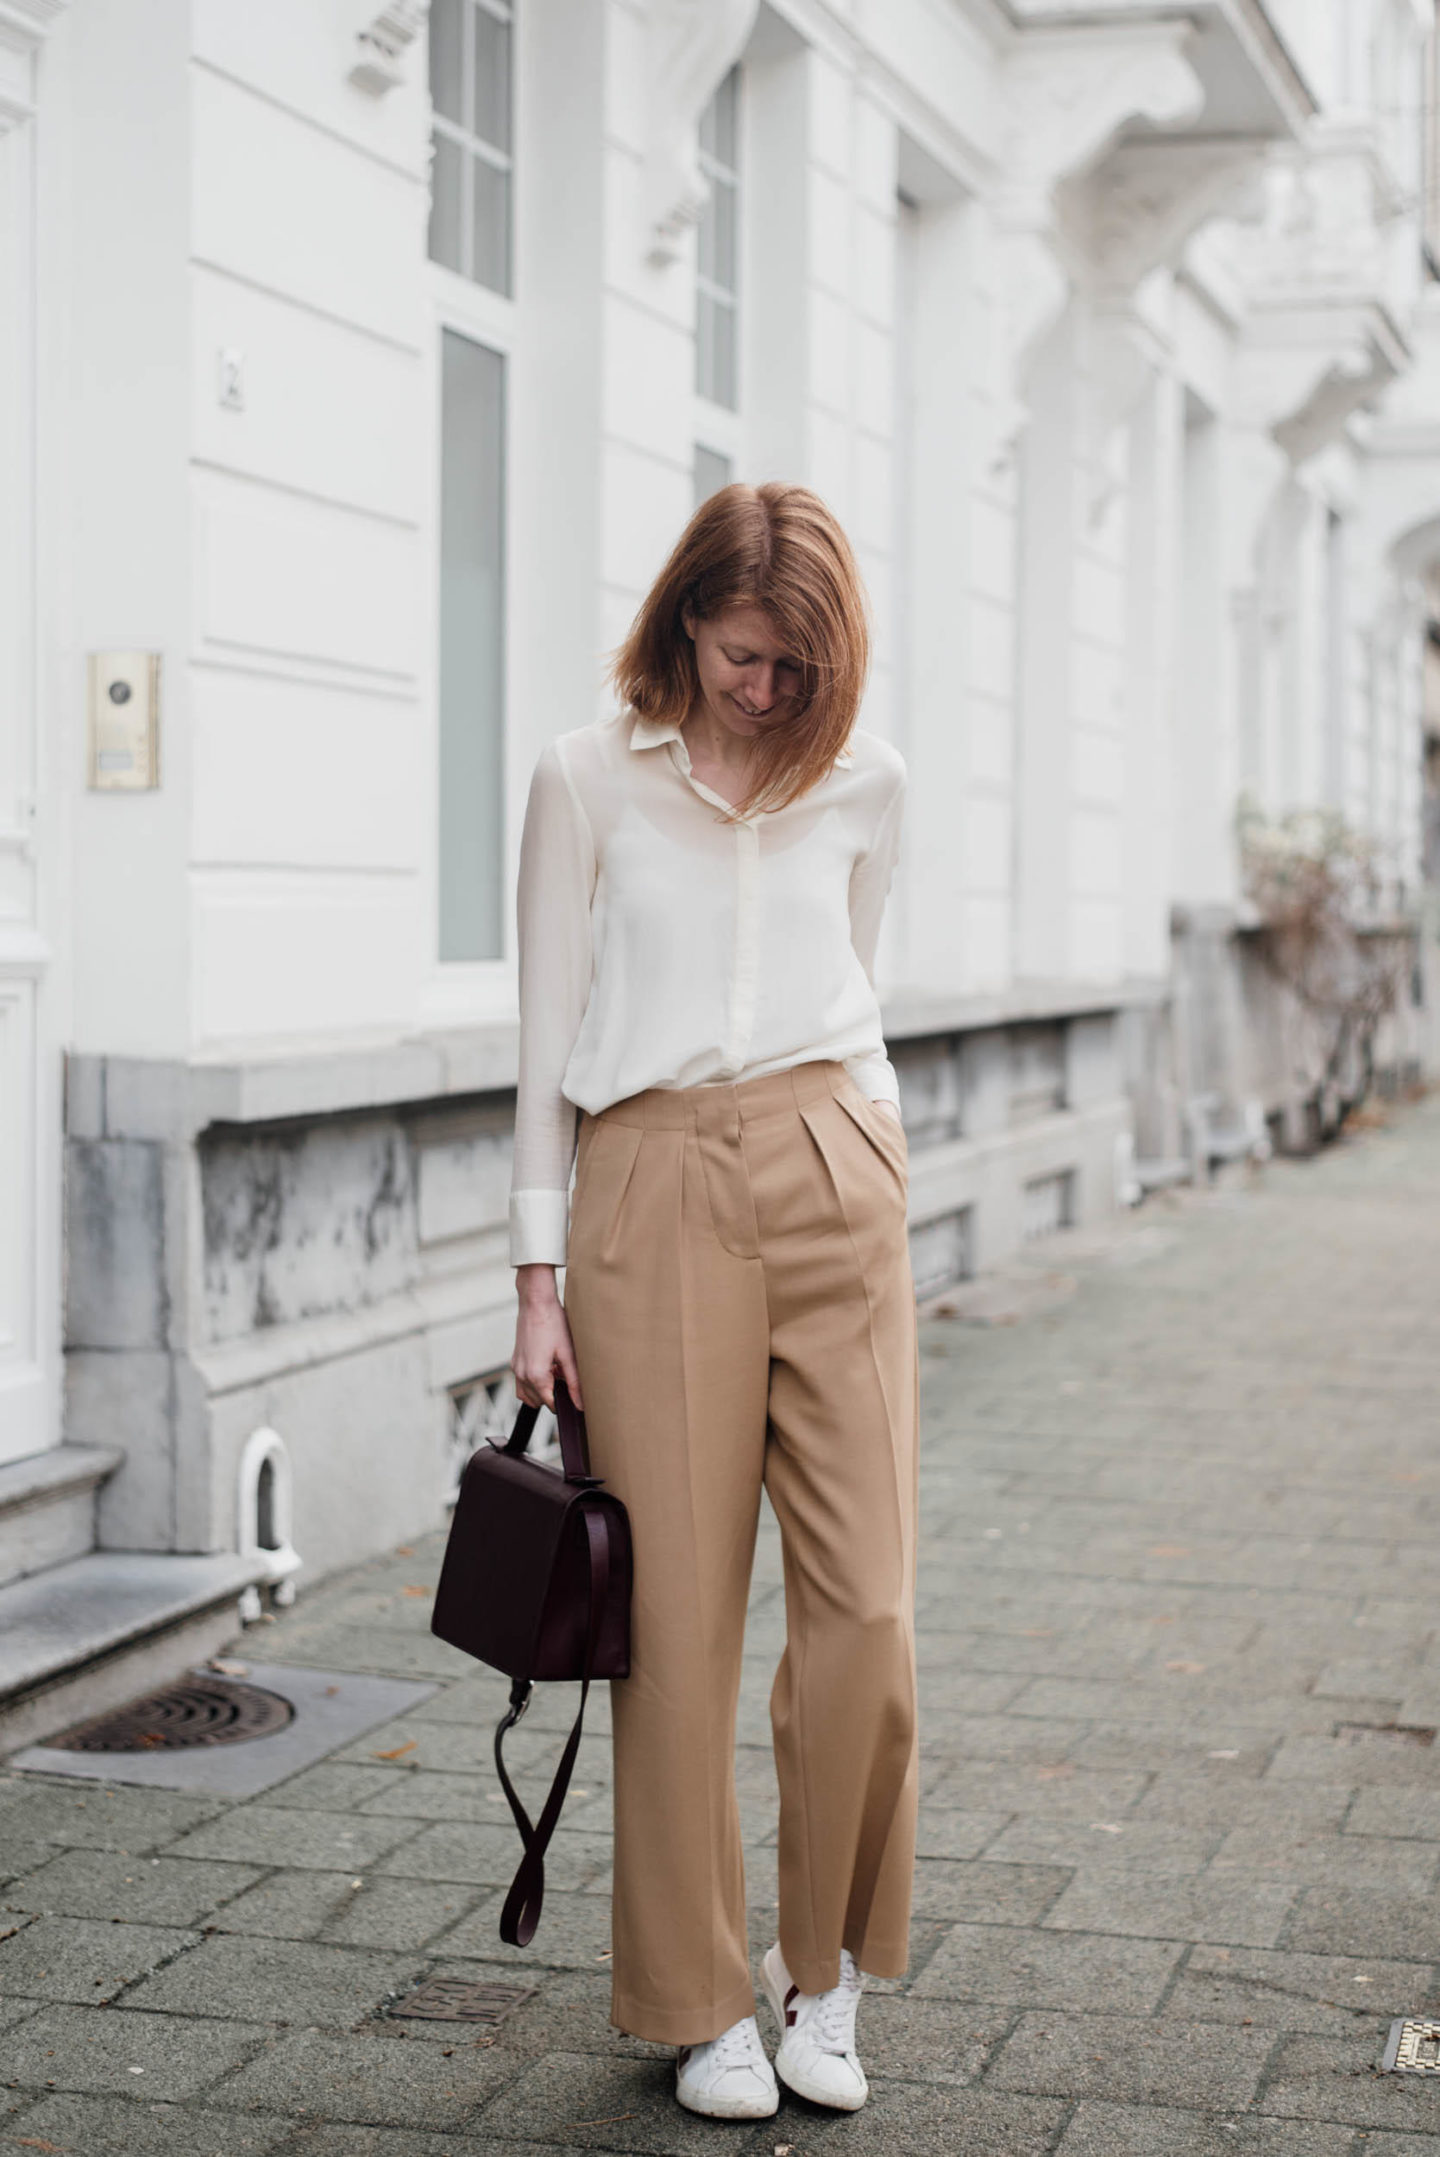 How to Style Palazzo Pants for an Office Look? - Lifeandtrendz